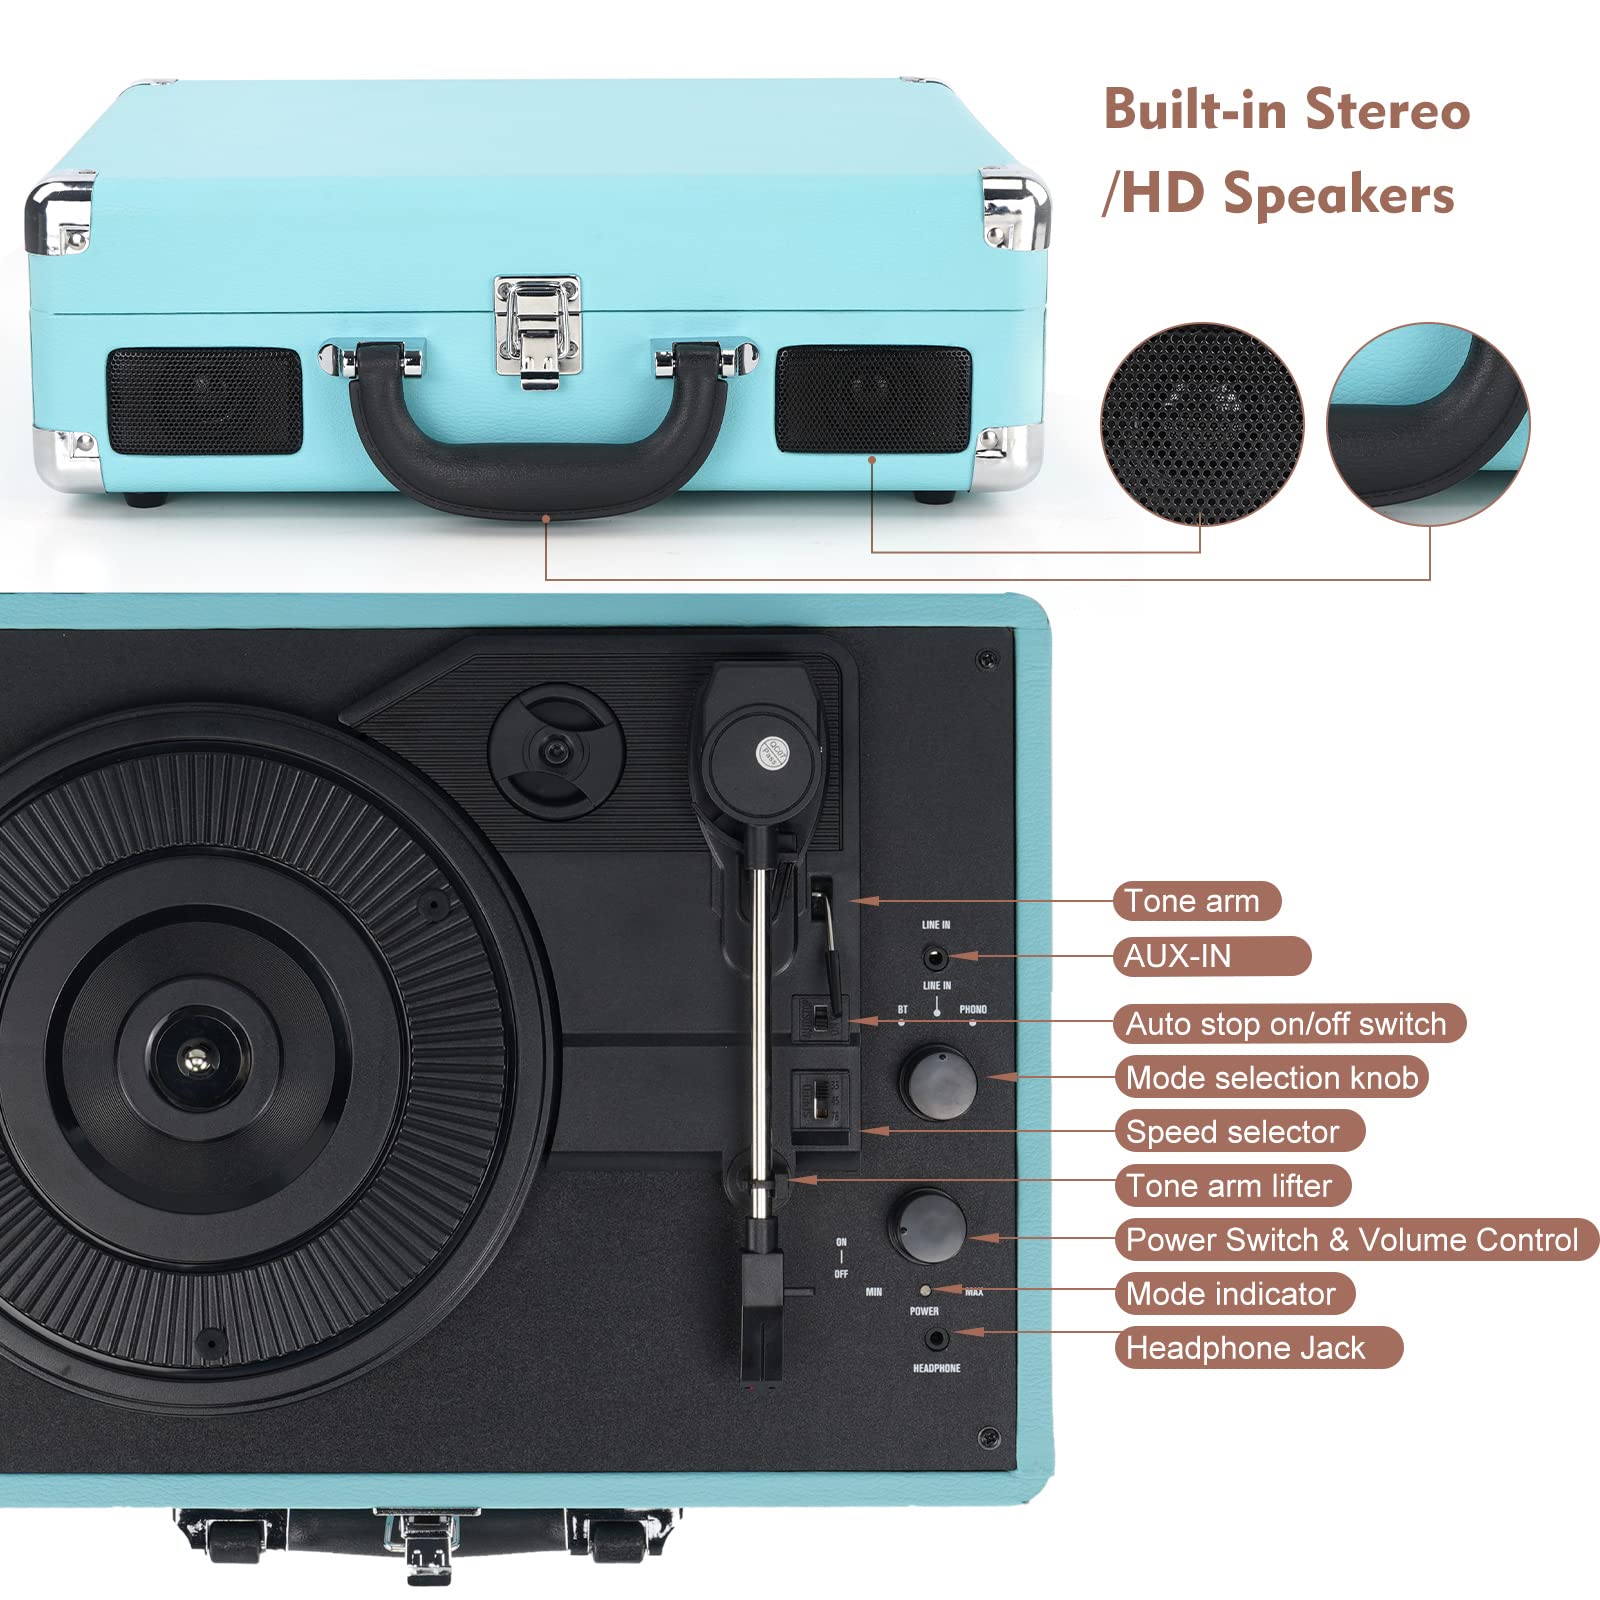 Suitcase　Vintage　Vinyl　Built-in　Speakers,　Bluetooth　Turntable　Stylus/RCA　with　IN-　Suitcase-DIGITNOW!　Record　Includes　3-Speed　Extra　Player　Out/AUX　Wireless　Portable